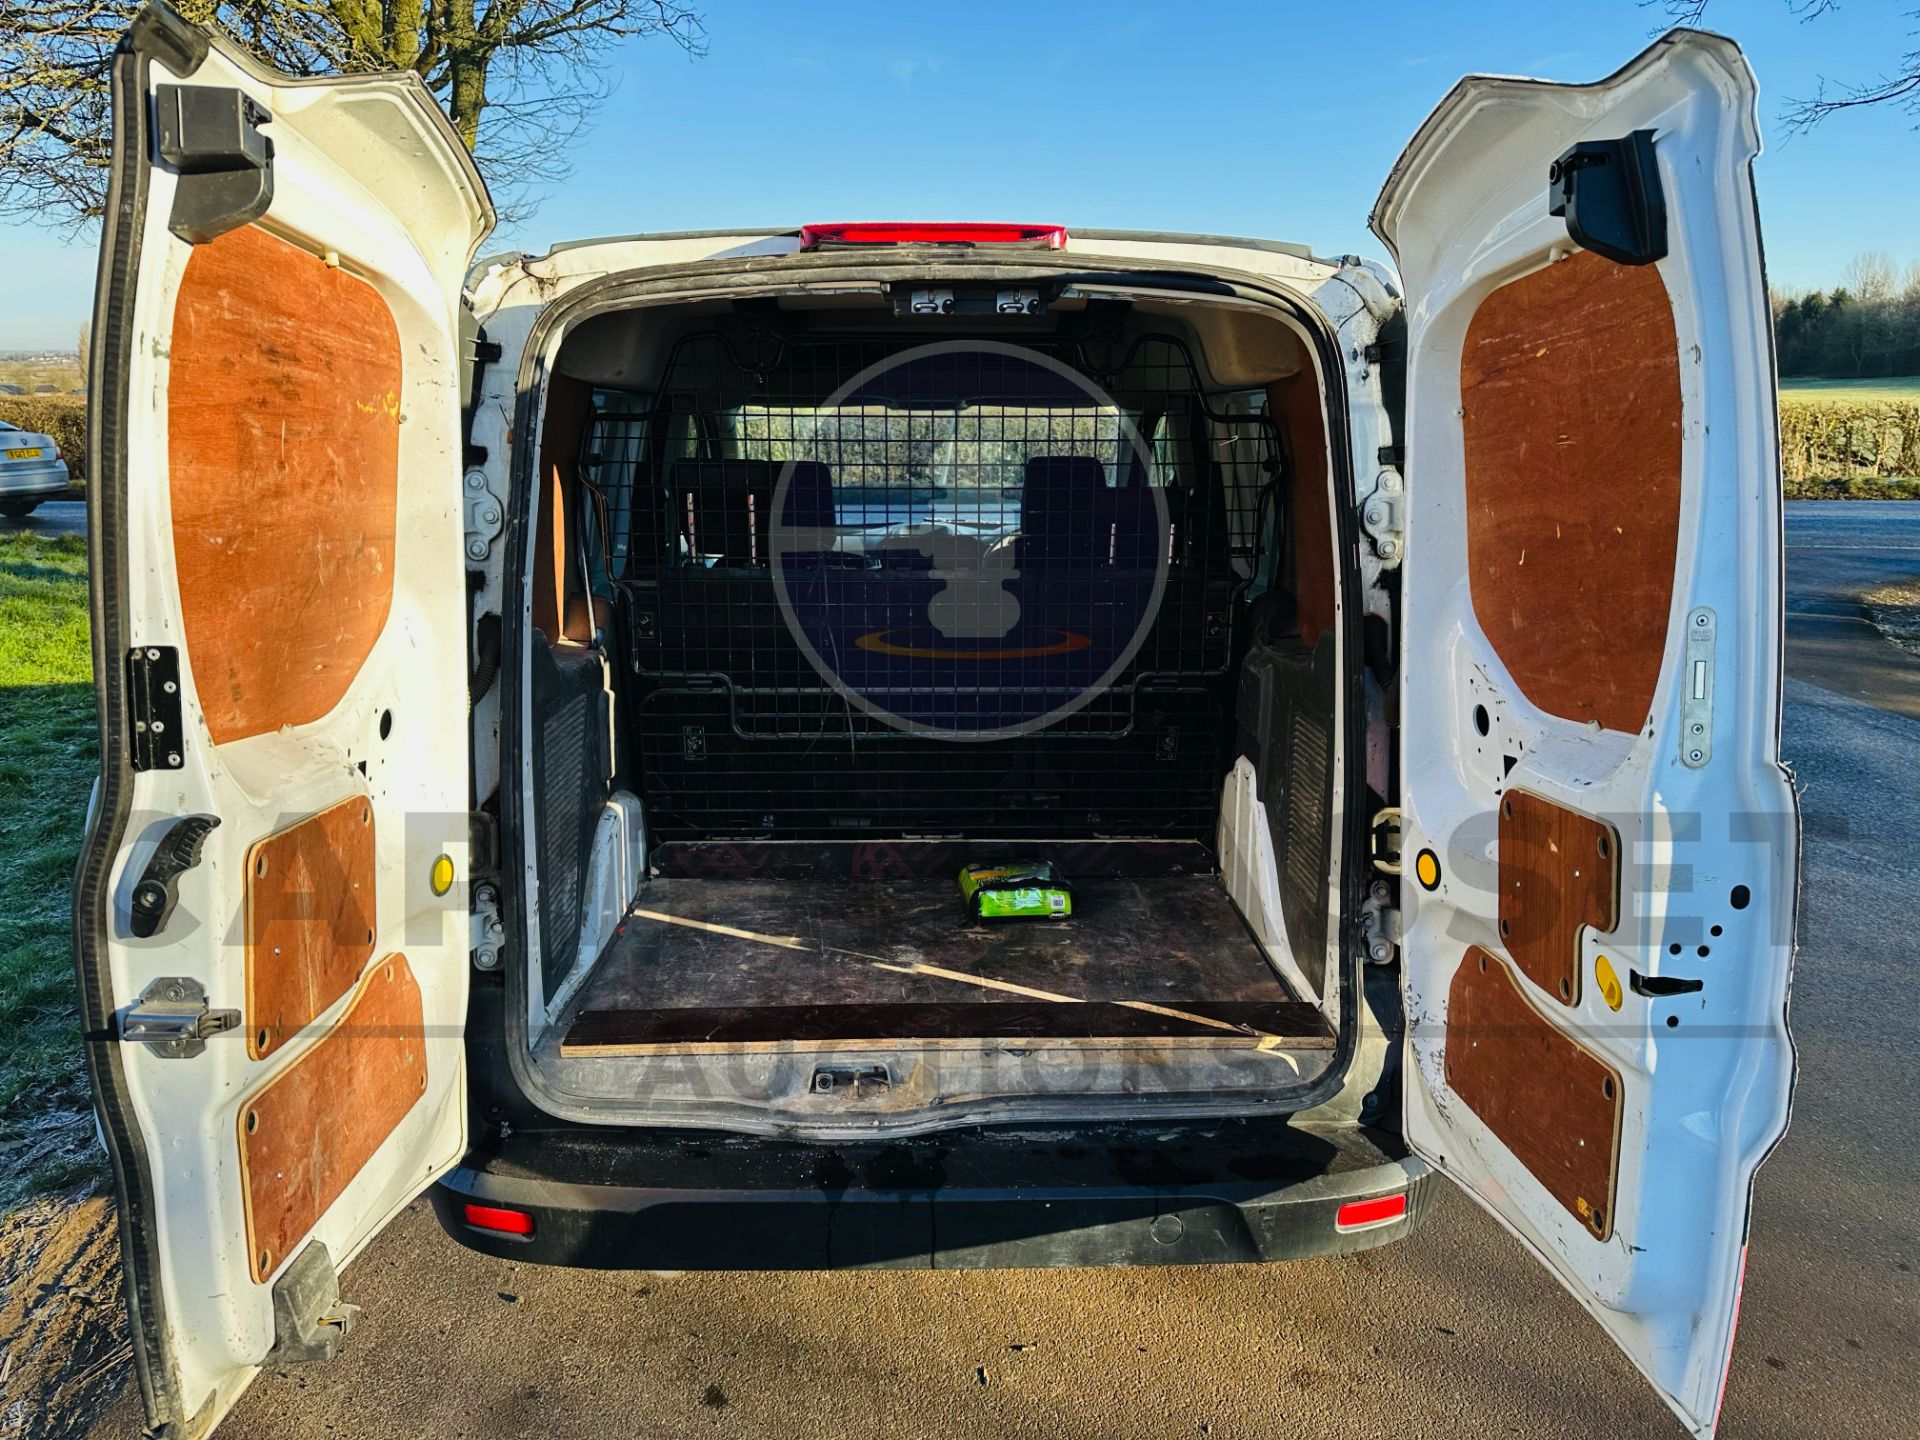 FORD TRANSIT CONNECT 1.5TDCI - 5 SEATER CREW VAN - 2019 MODEL - 1 OWNER FROM NEW - ULEZ COMPLIANT! - Image 14 of 32